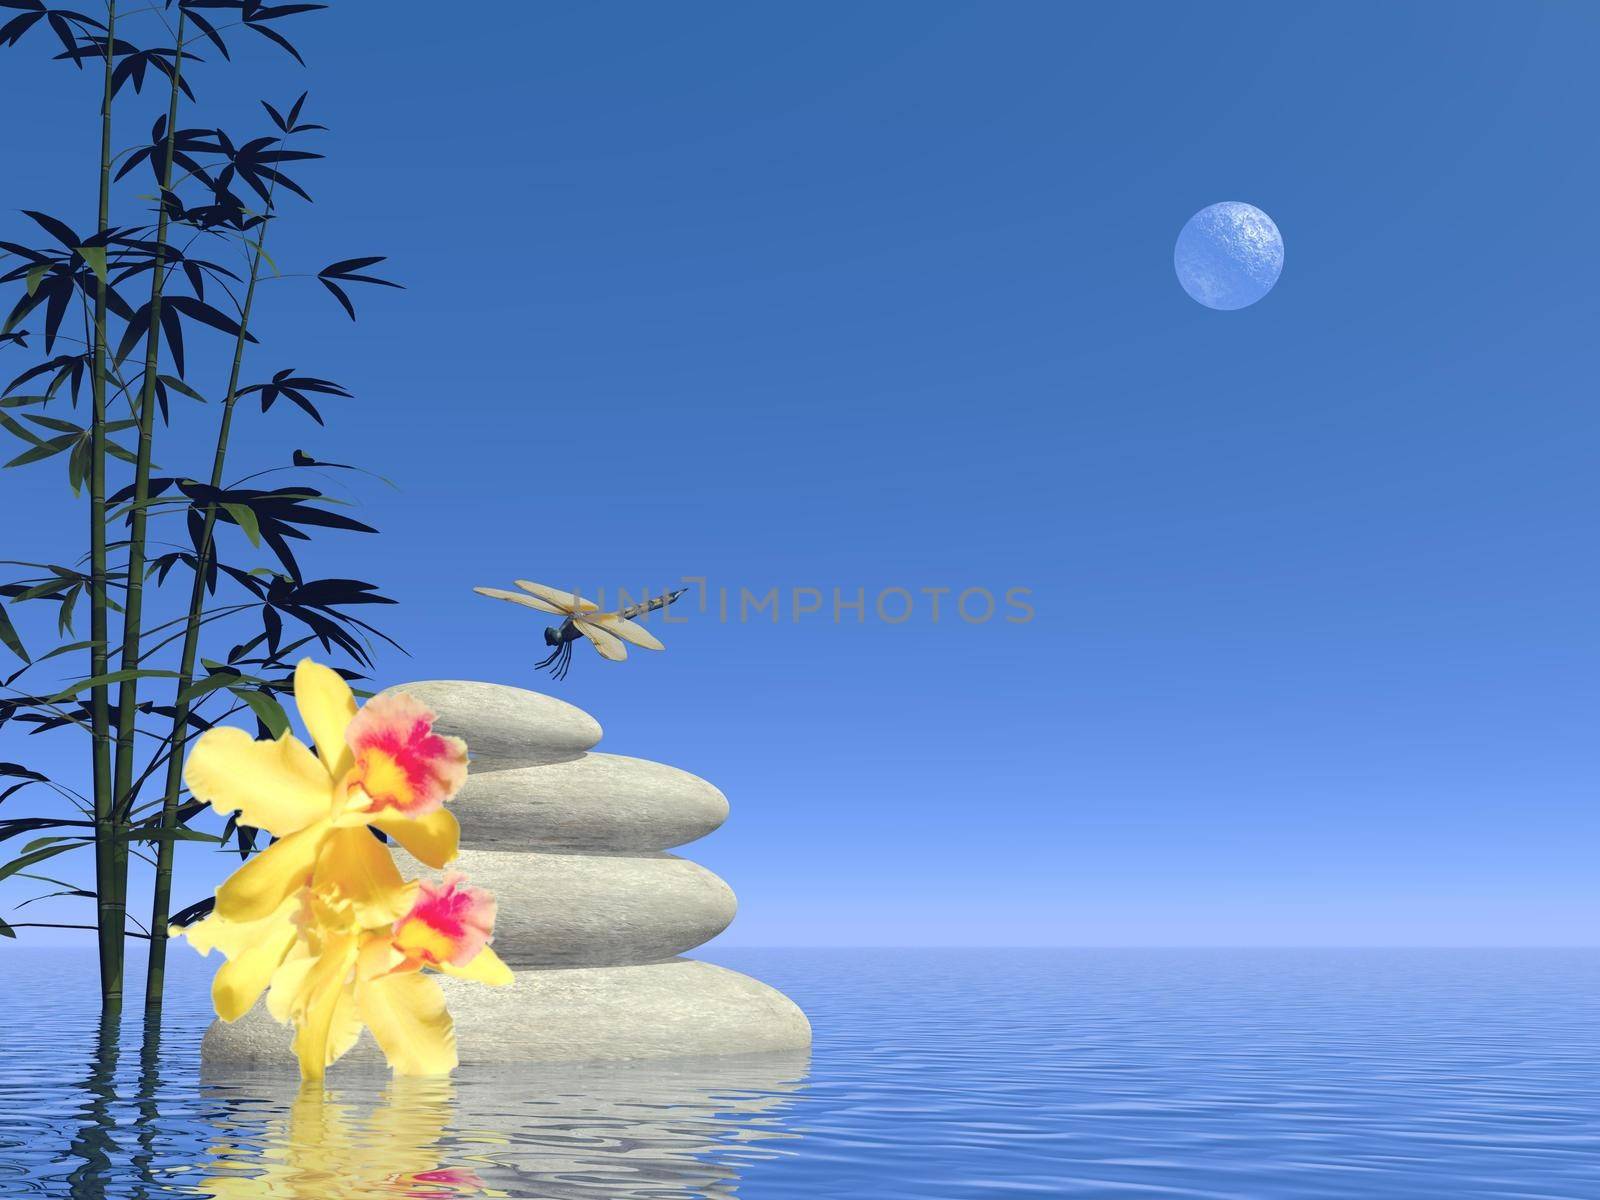 White stones in balance, yellow flowers and dragonfly next to bamboos into water by full moon clear night